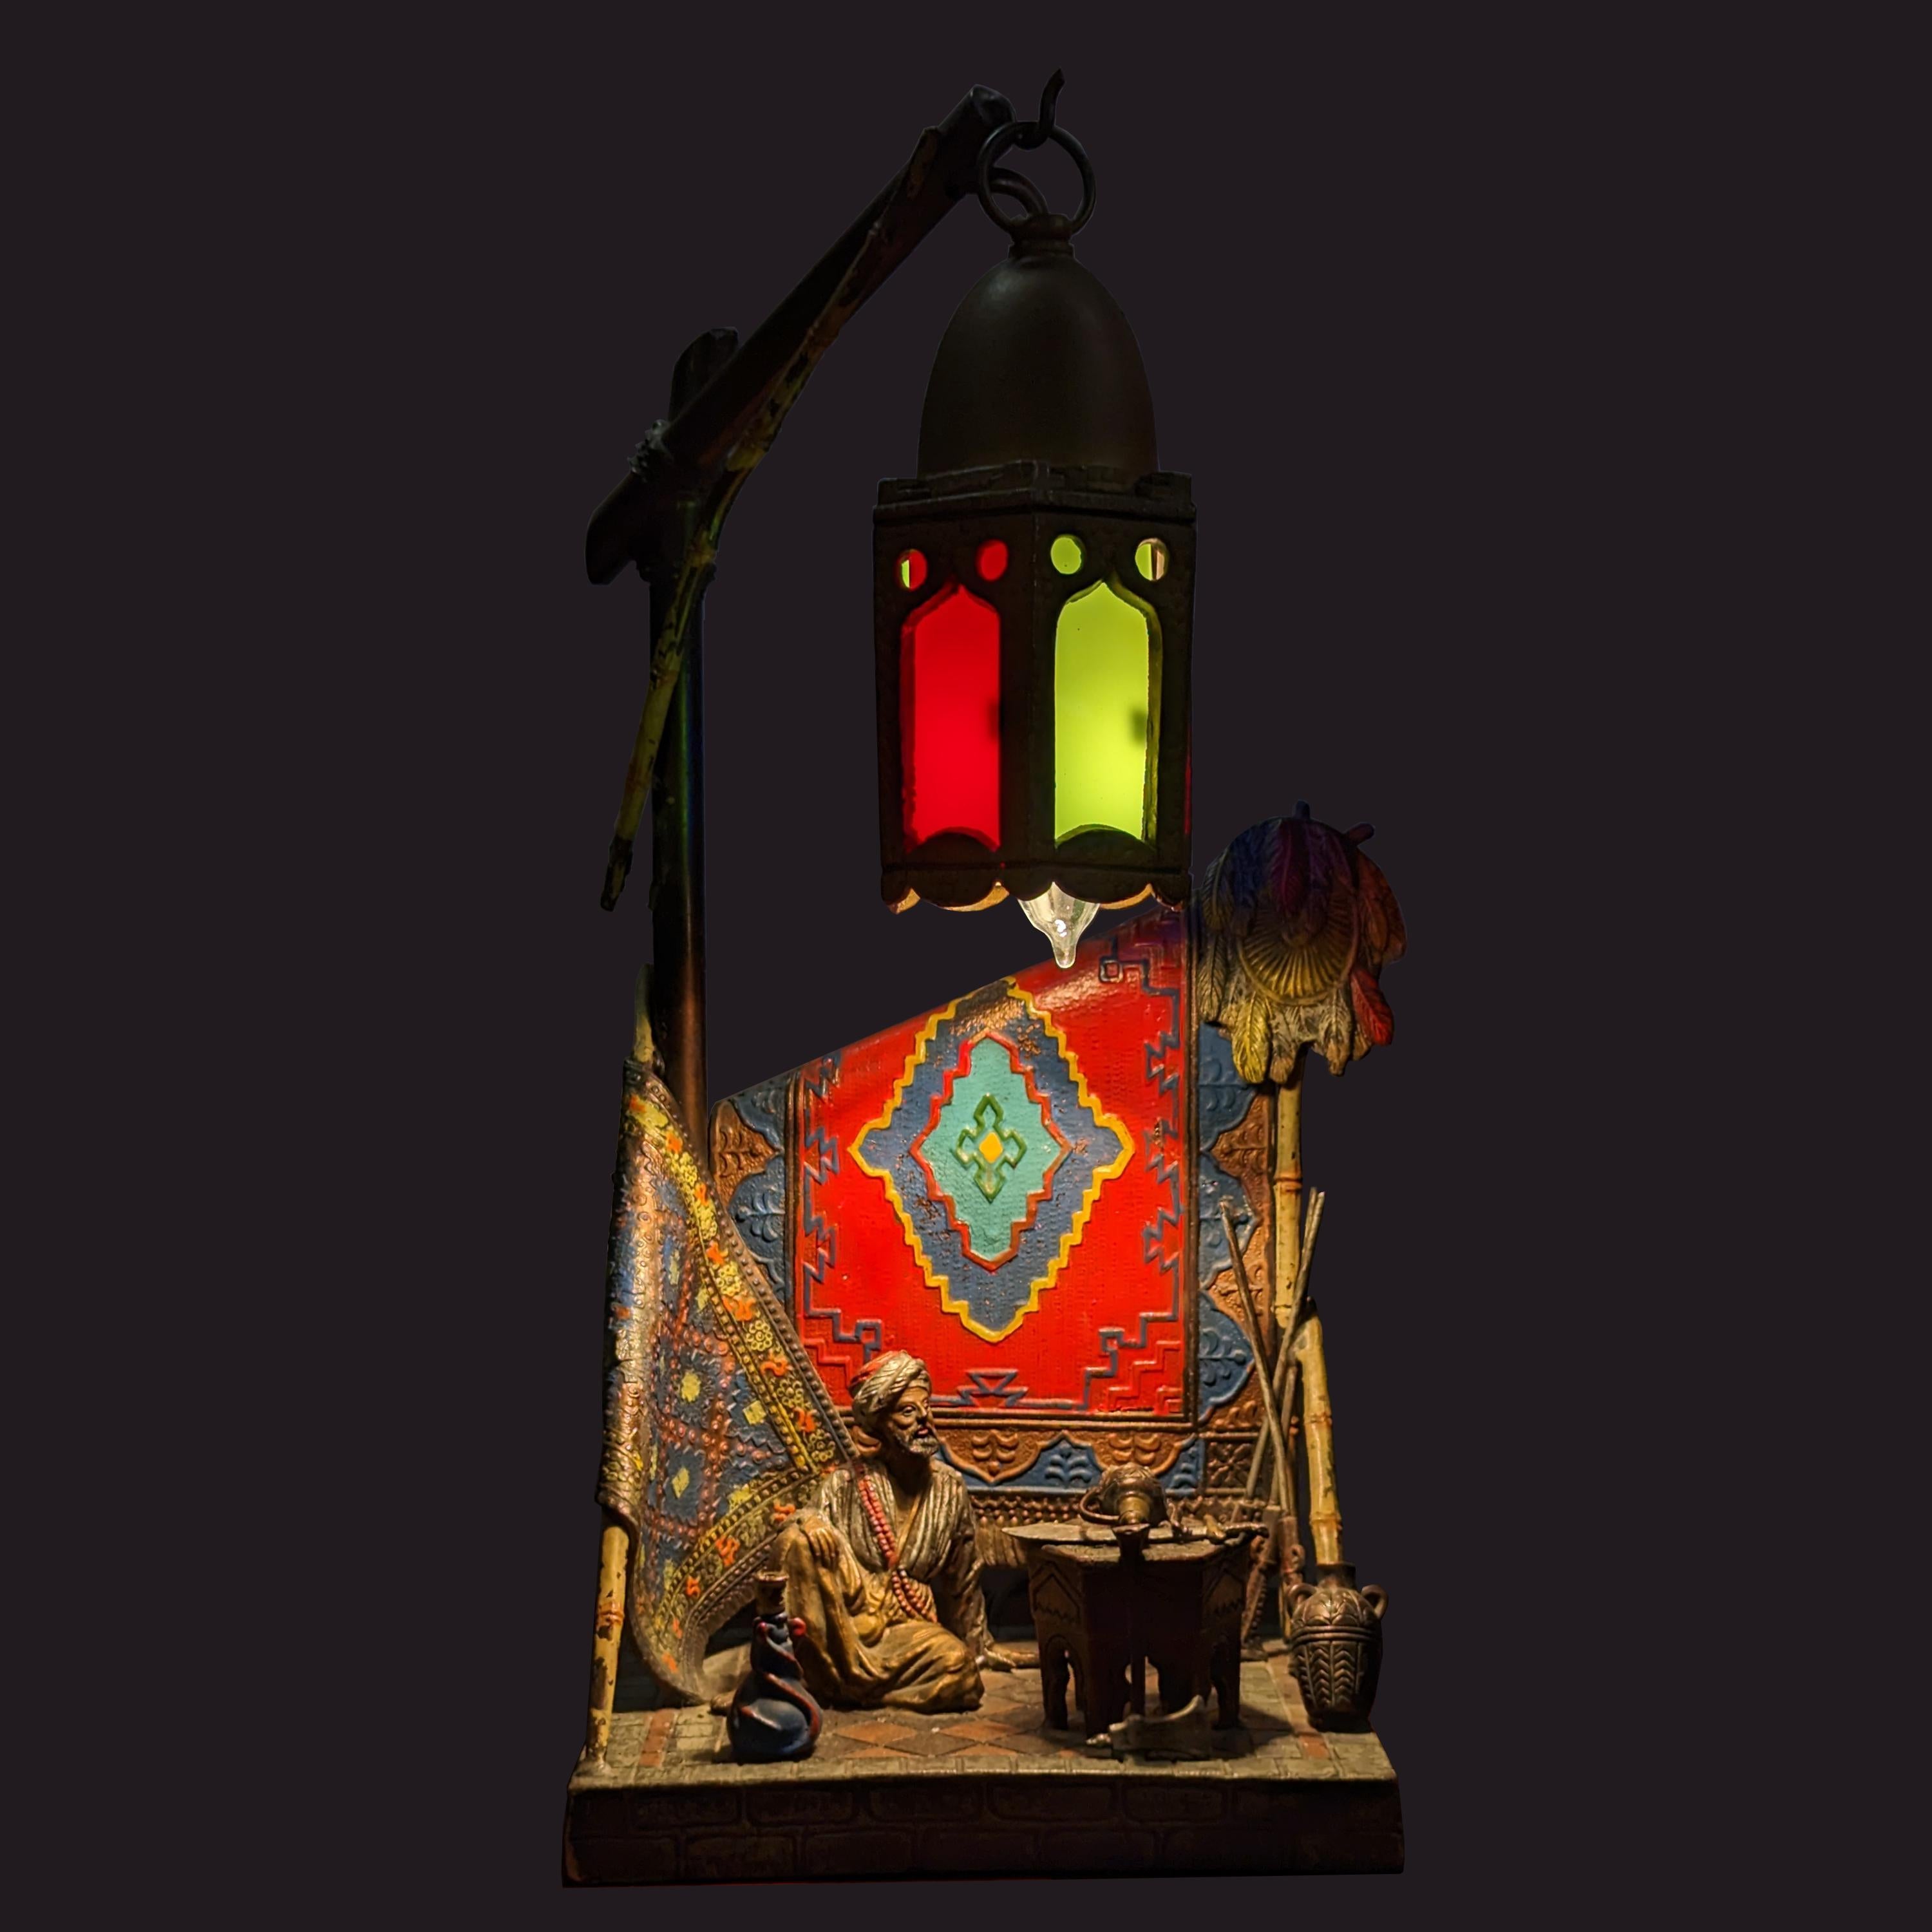 A good antique Austrian cold-painted bronze/spelter Franz Bergmann style Arab carpet seller lamp, circa 1920.
The lamp has just been professionally rewired to code. The lamp depicts a seated Arab carpet seller with a lamp above him, behind a